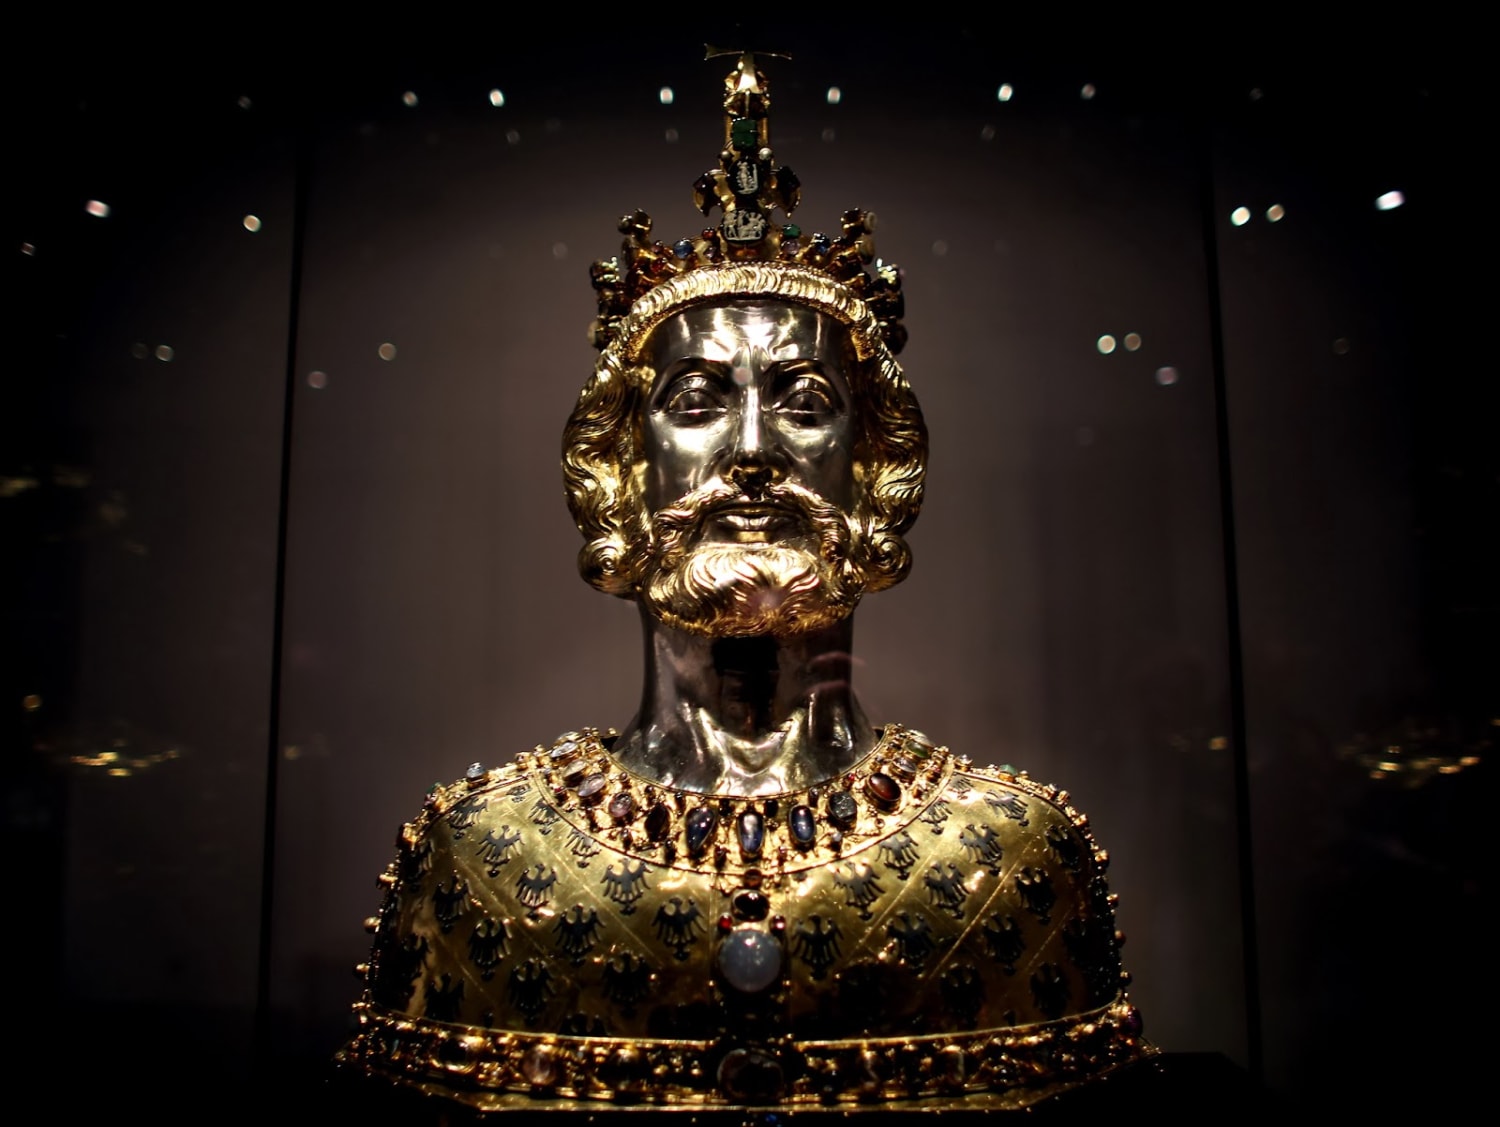 A gold reliquary bust of Charlemagne, containing his skullcap, commissioned by Holy Roman Emperor Charles IV in 1349.